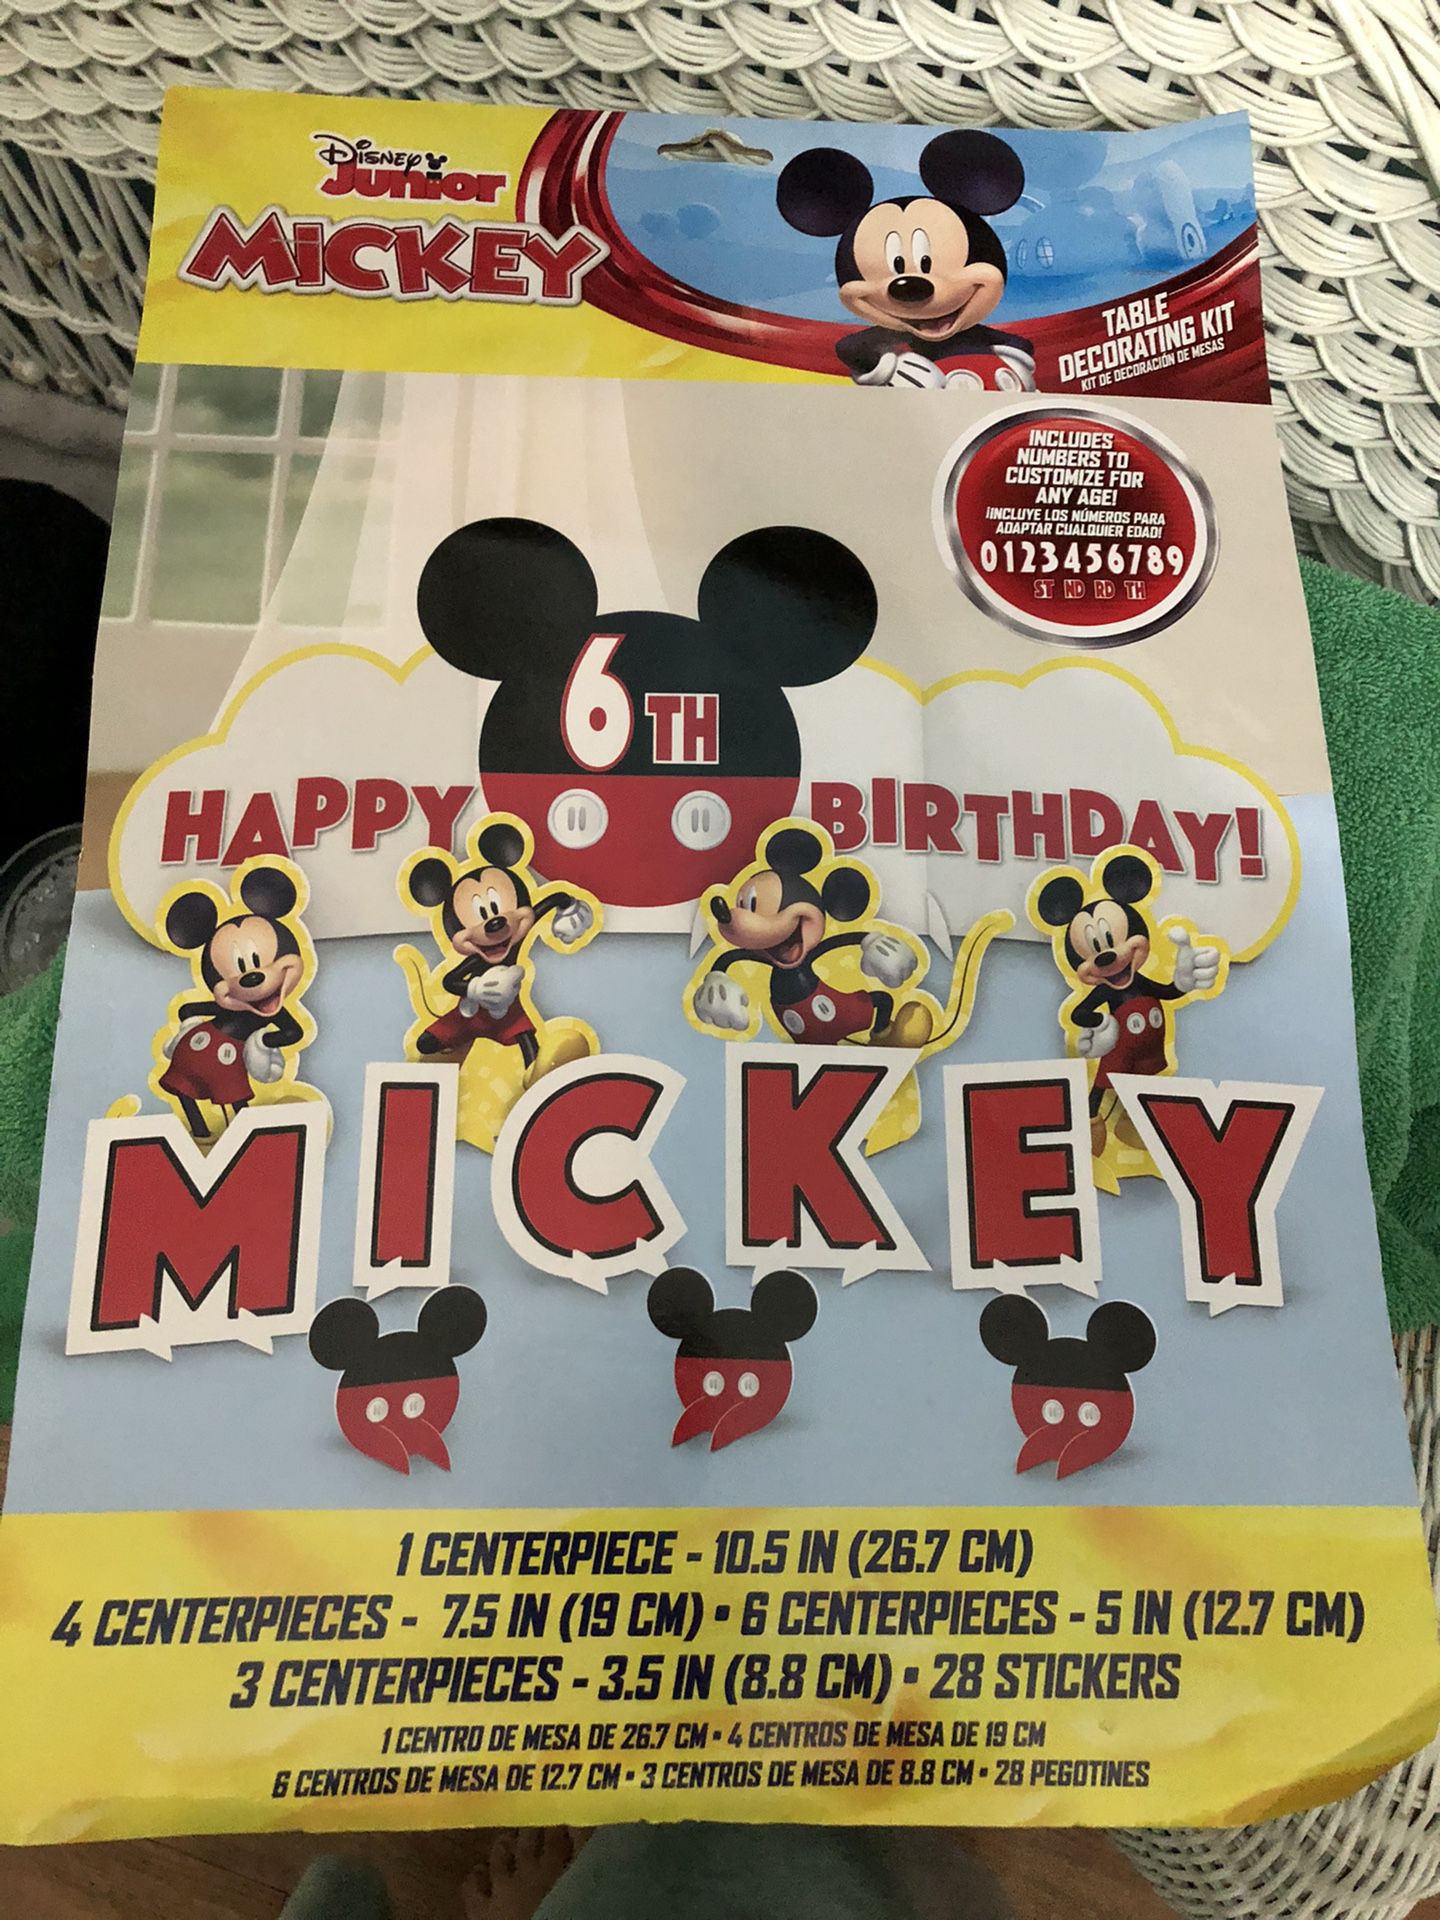 Micky Mouse Centerpieces And Stickers For 6 Years Old Birthday party New In Package 